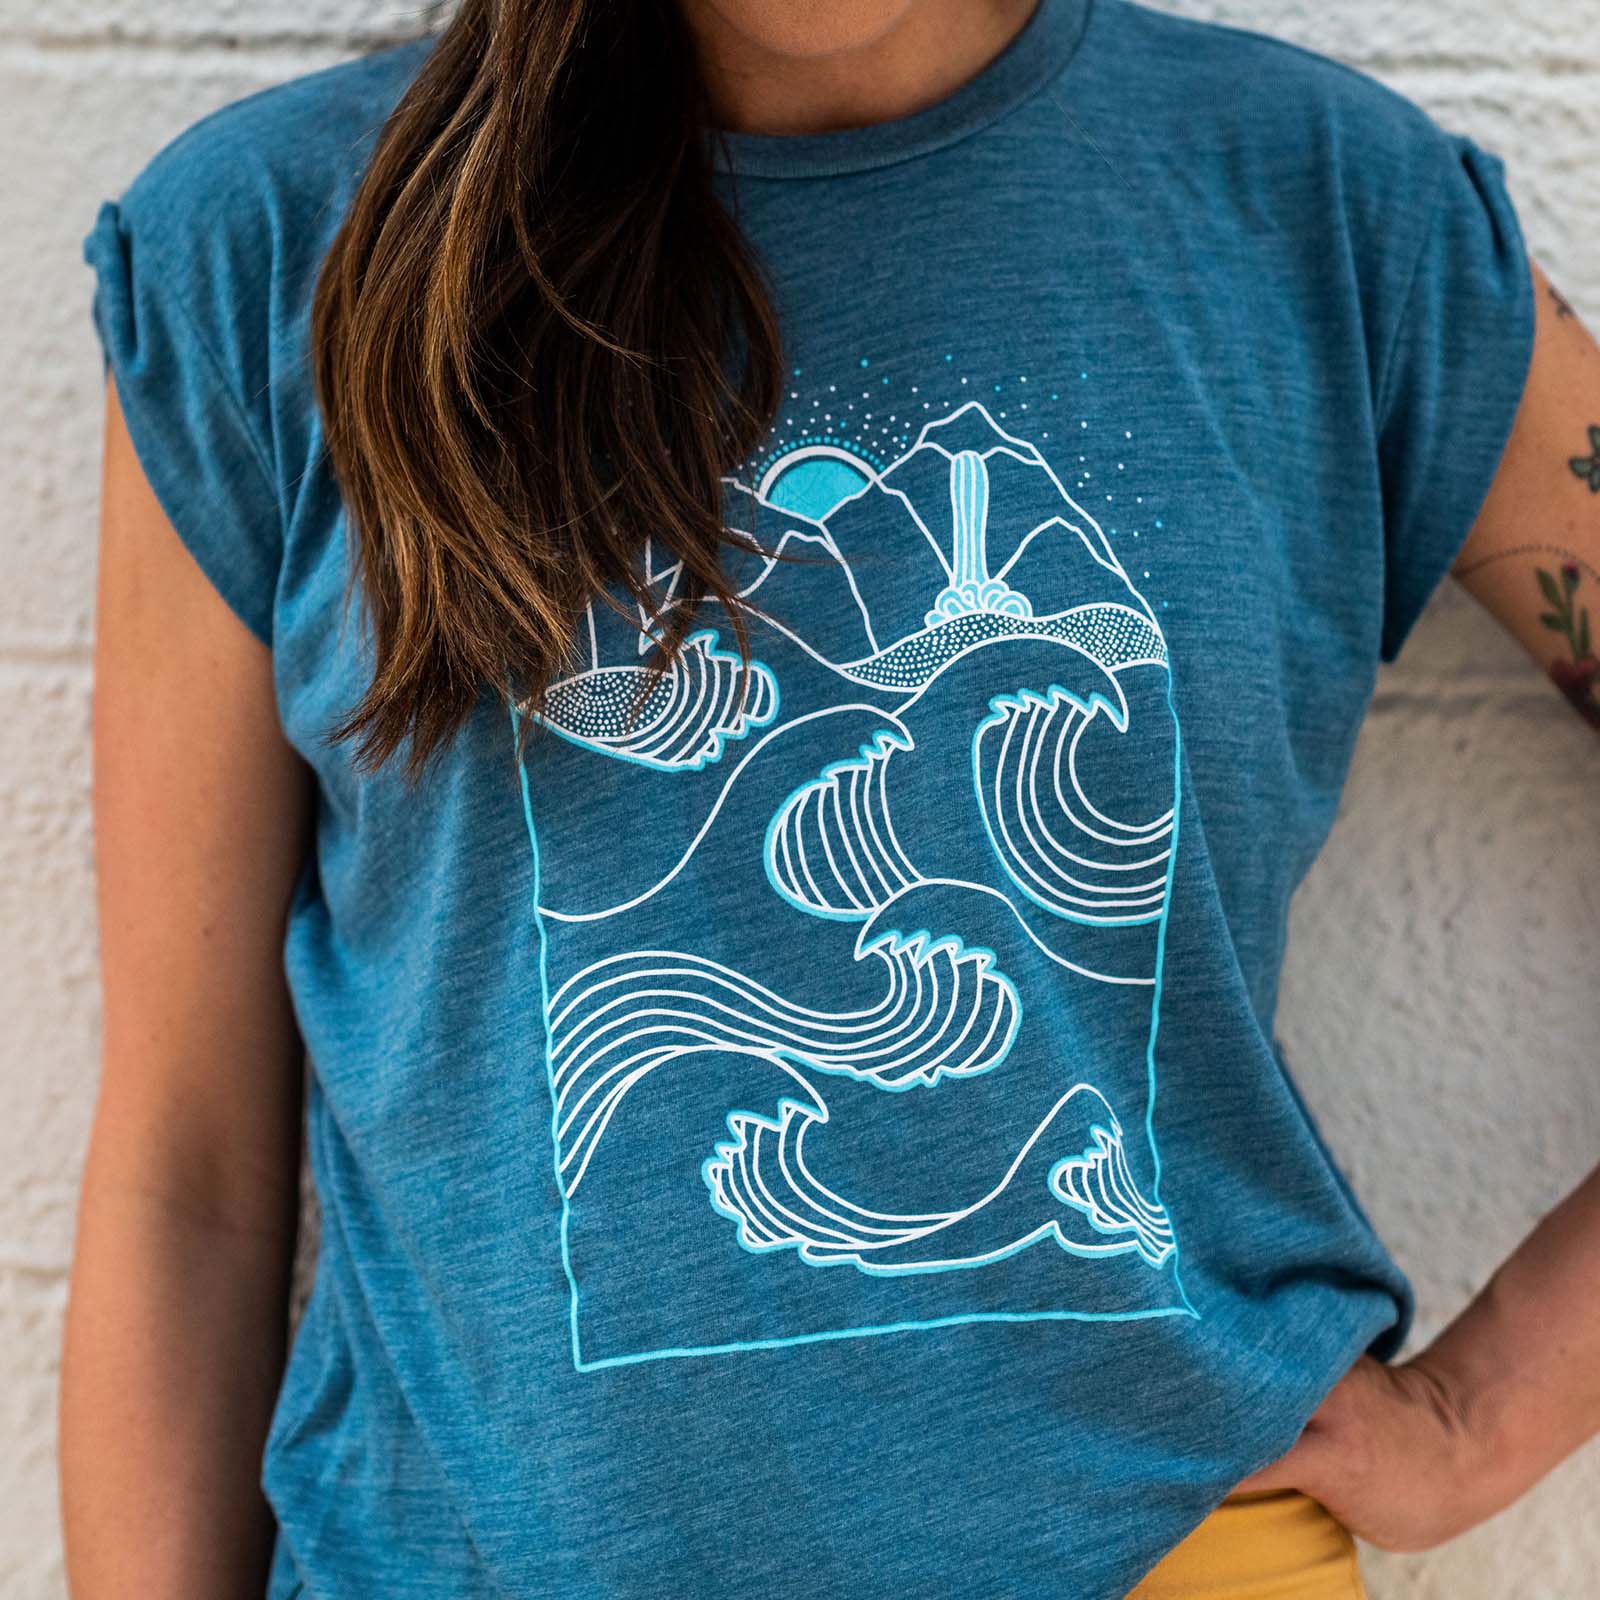 Mountains to Sea Rolled Cuffs Flowy Shirt | Heather Teal - Ketsol